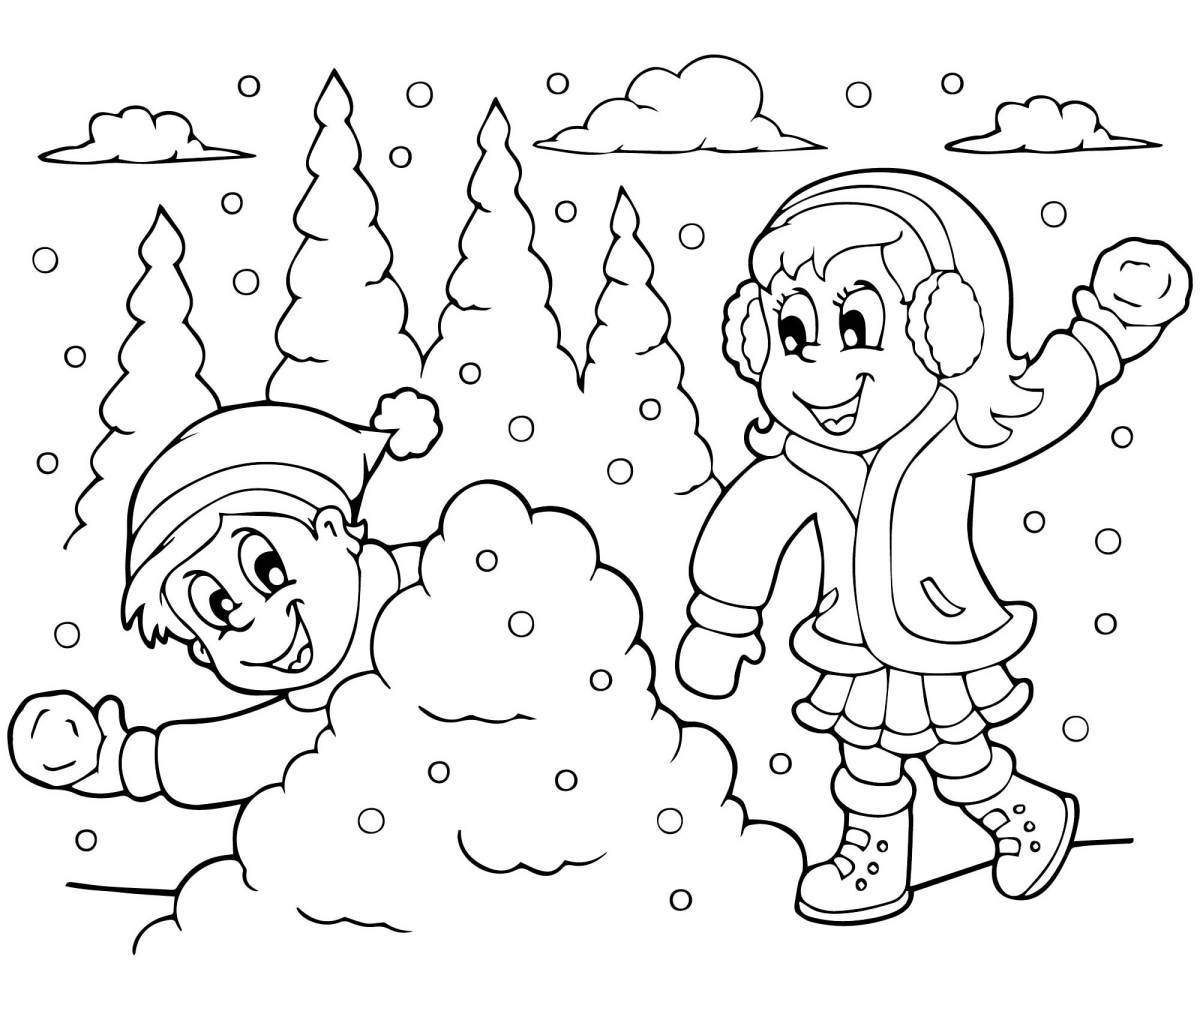 Coloring book frosty winter